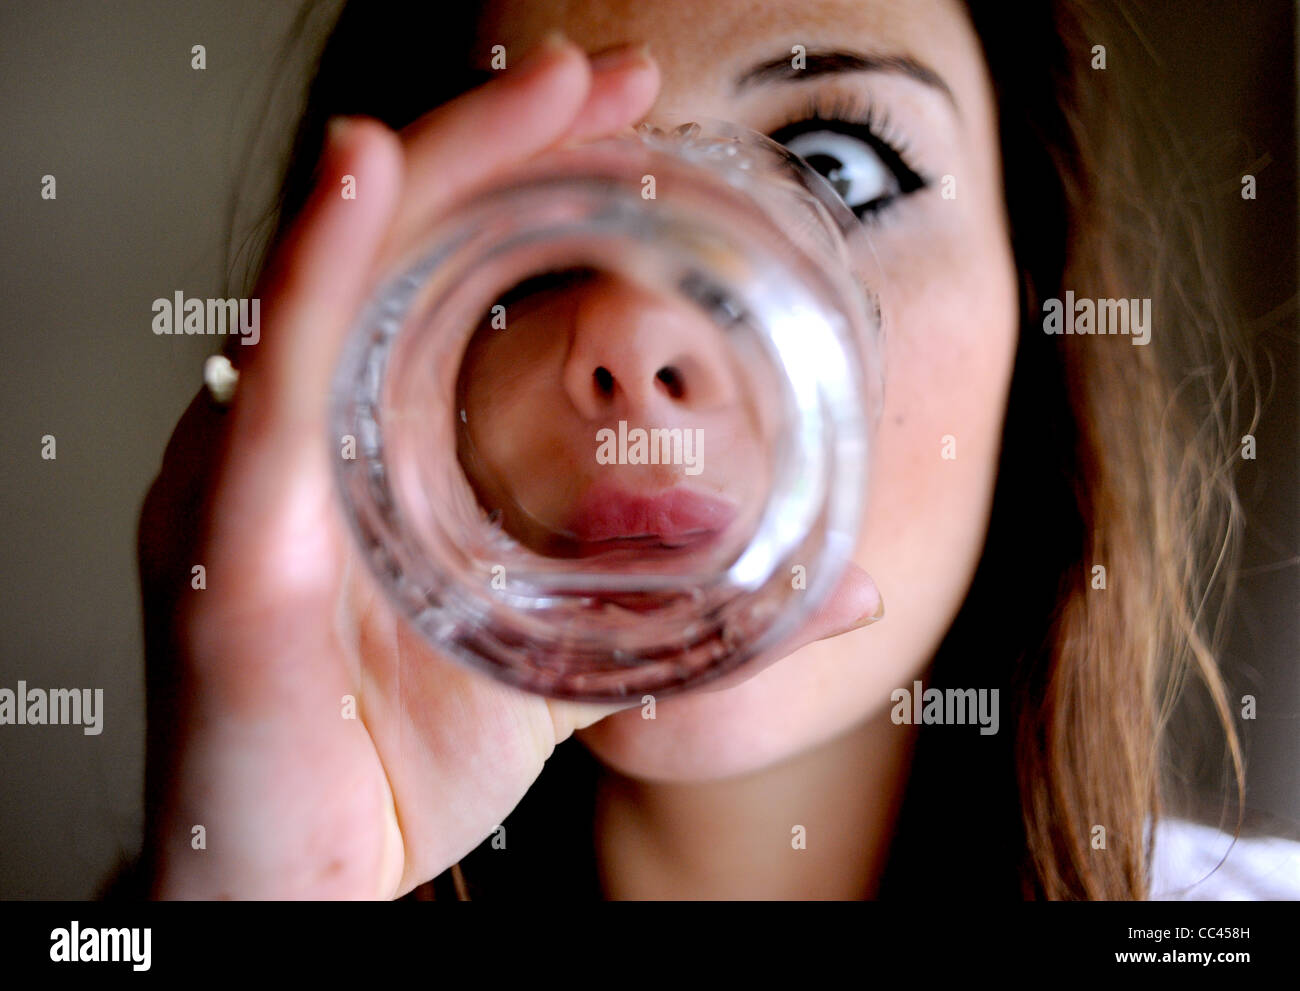 looking at life through the bottom of a glass - posed by model to illustrate alcohol abuse and young woman alcoholic Stock Photo